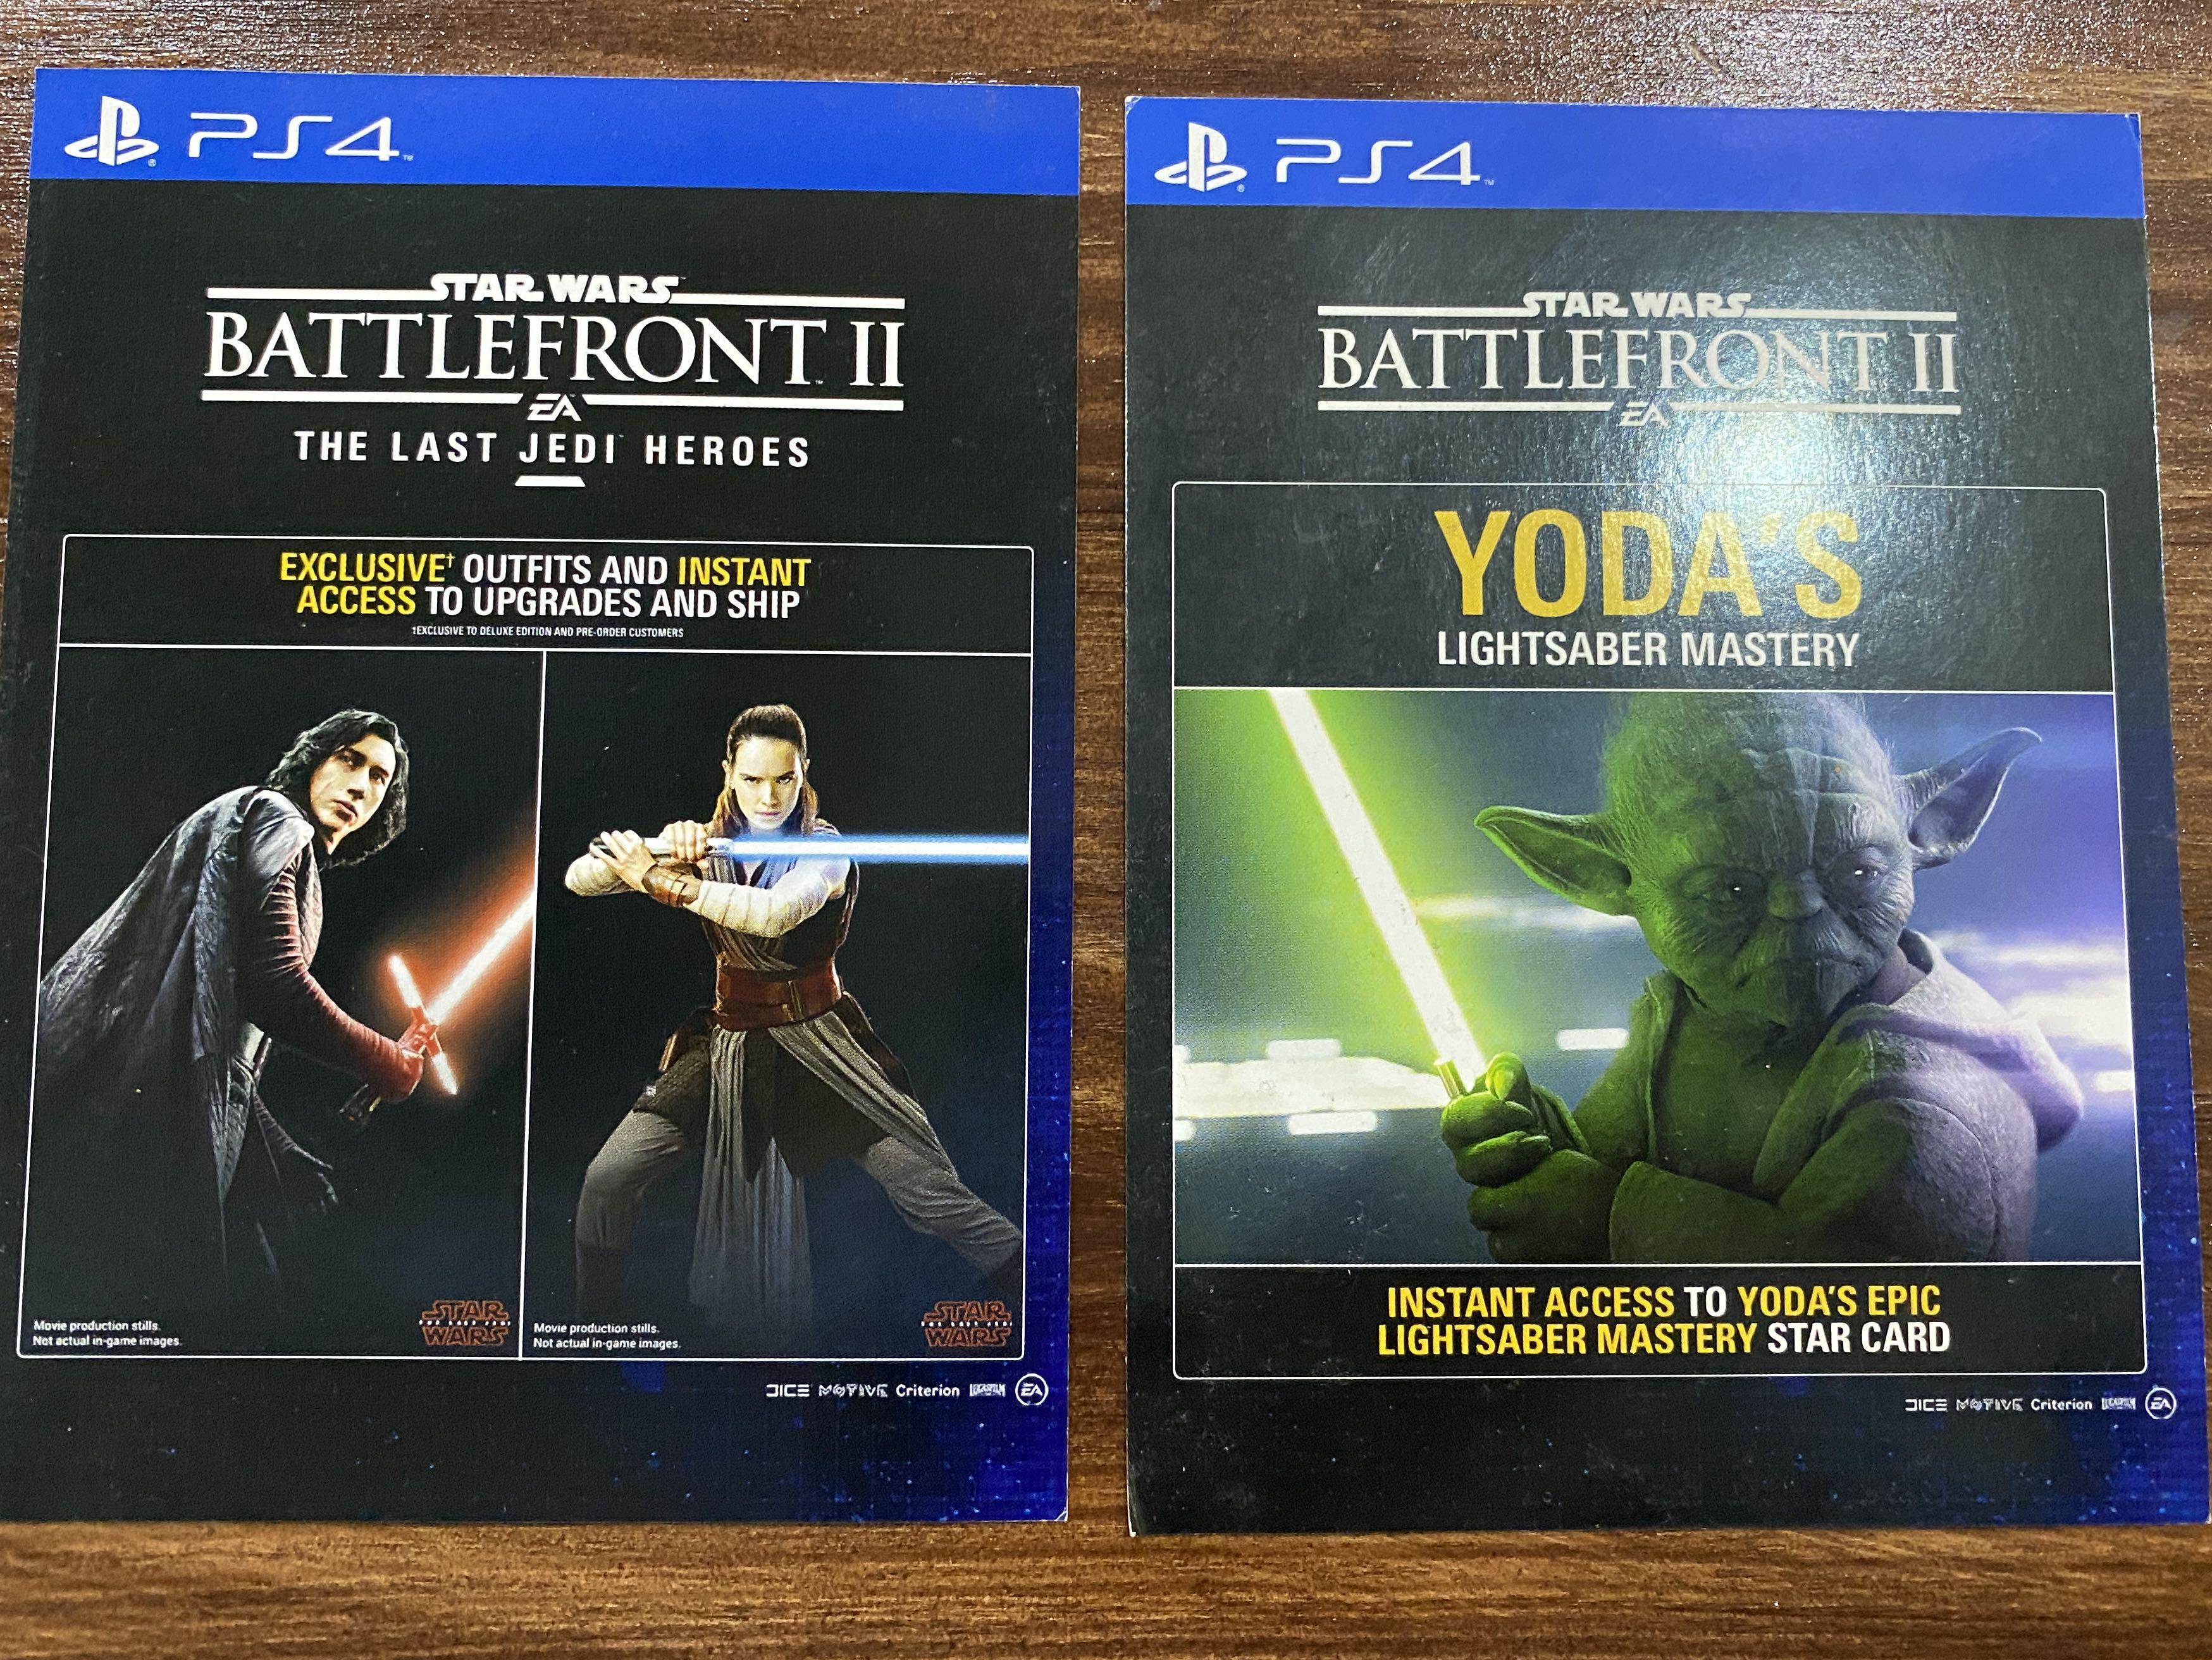 PS4 Star Wars Battlefront 2 code - please read the card before purchase - new, Video Gaming, Video Games, PlayStation on Carousell